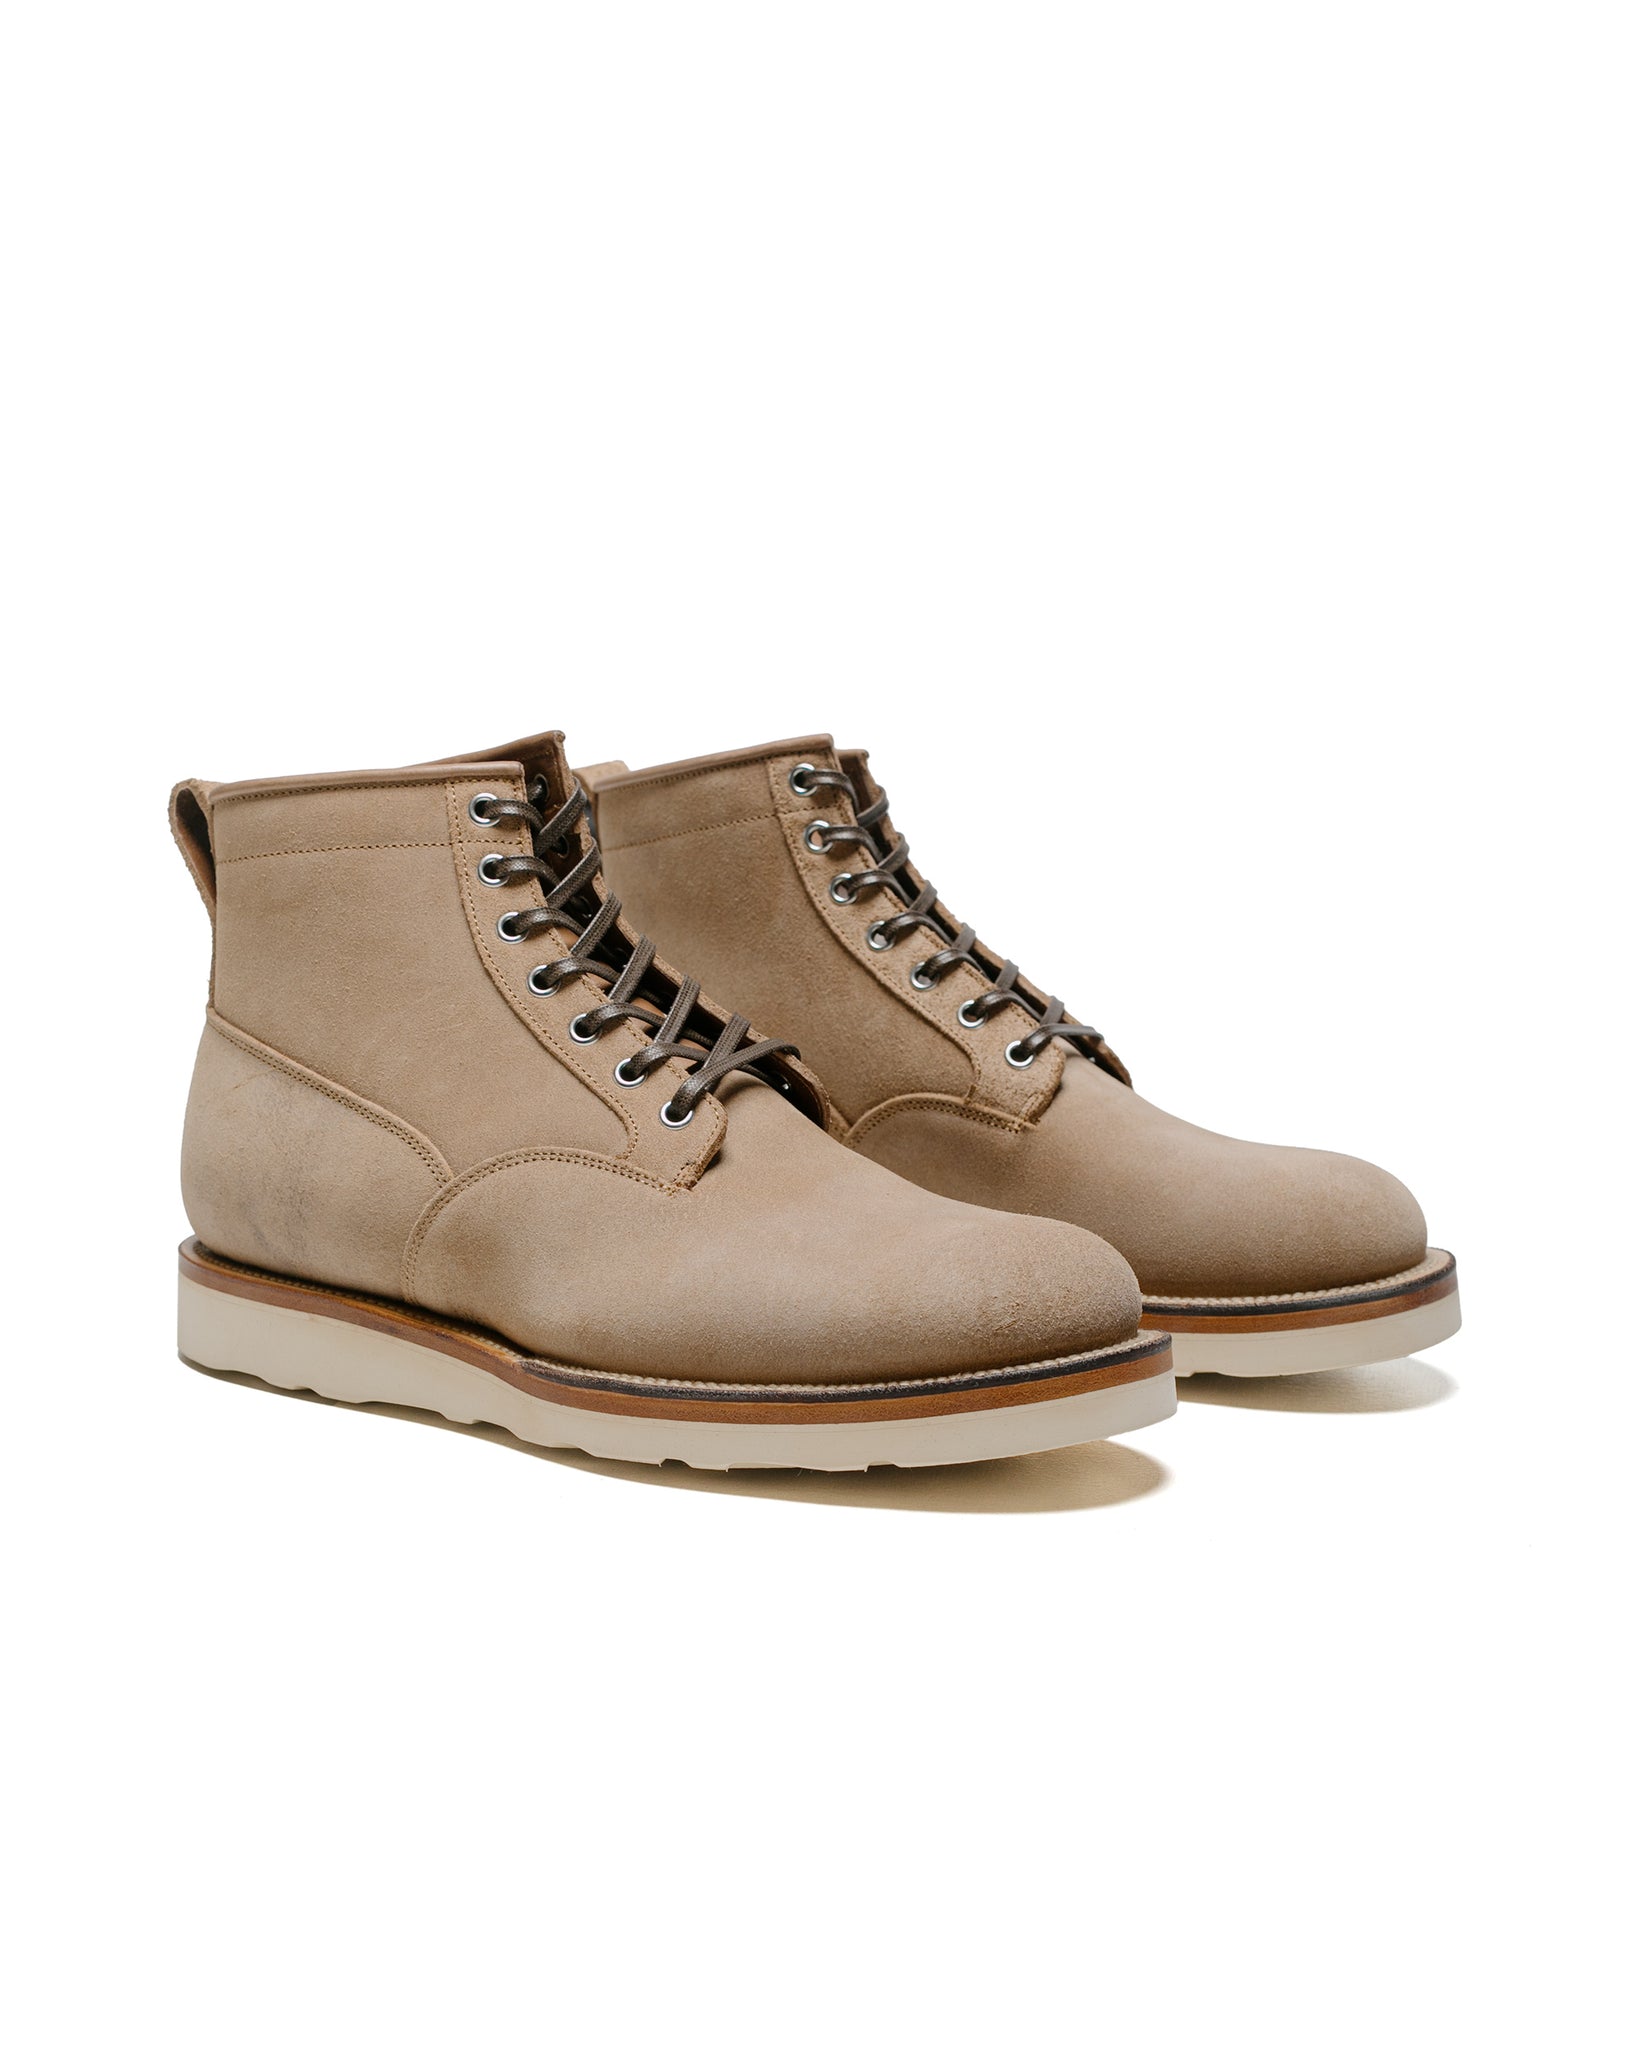 Viberg 1035 Scout Boot Natural Chromexcel Roughout side